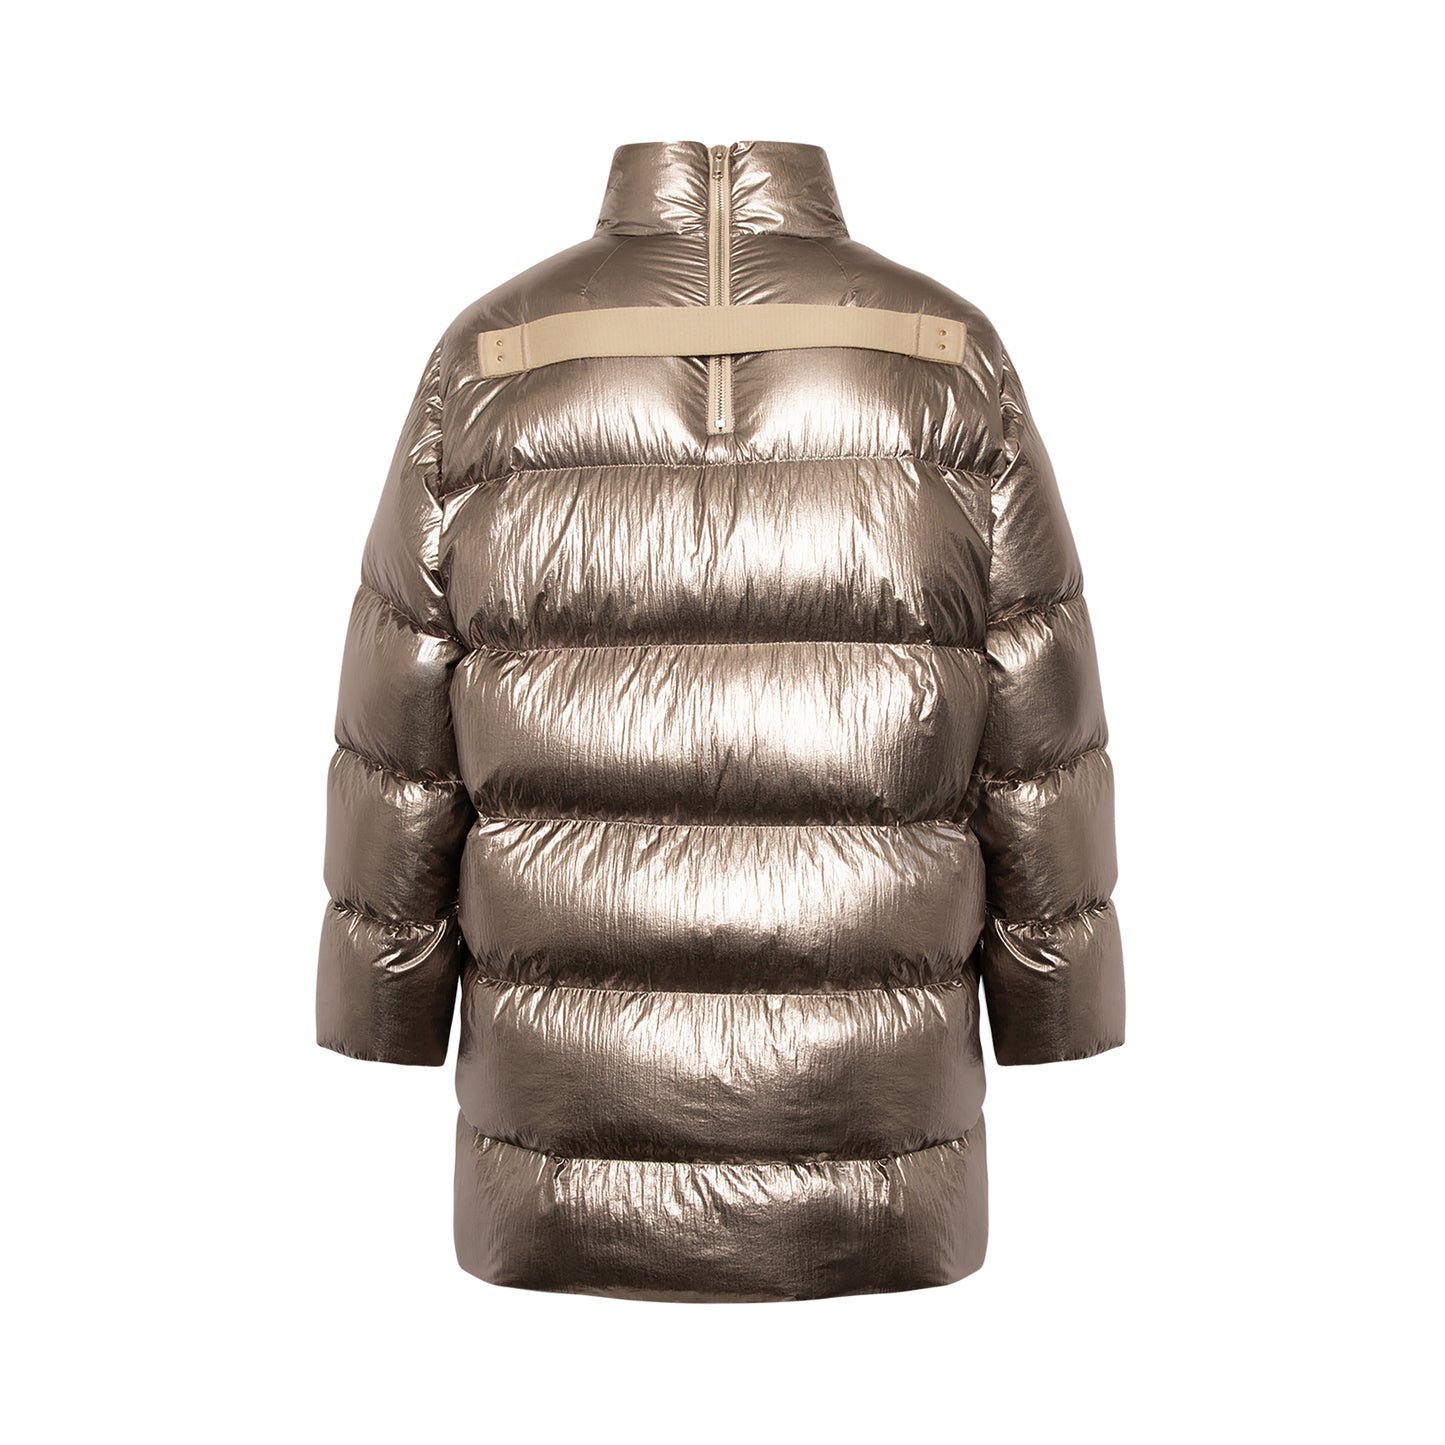 Rick Owens x Moncler Puffer Coat in Silver